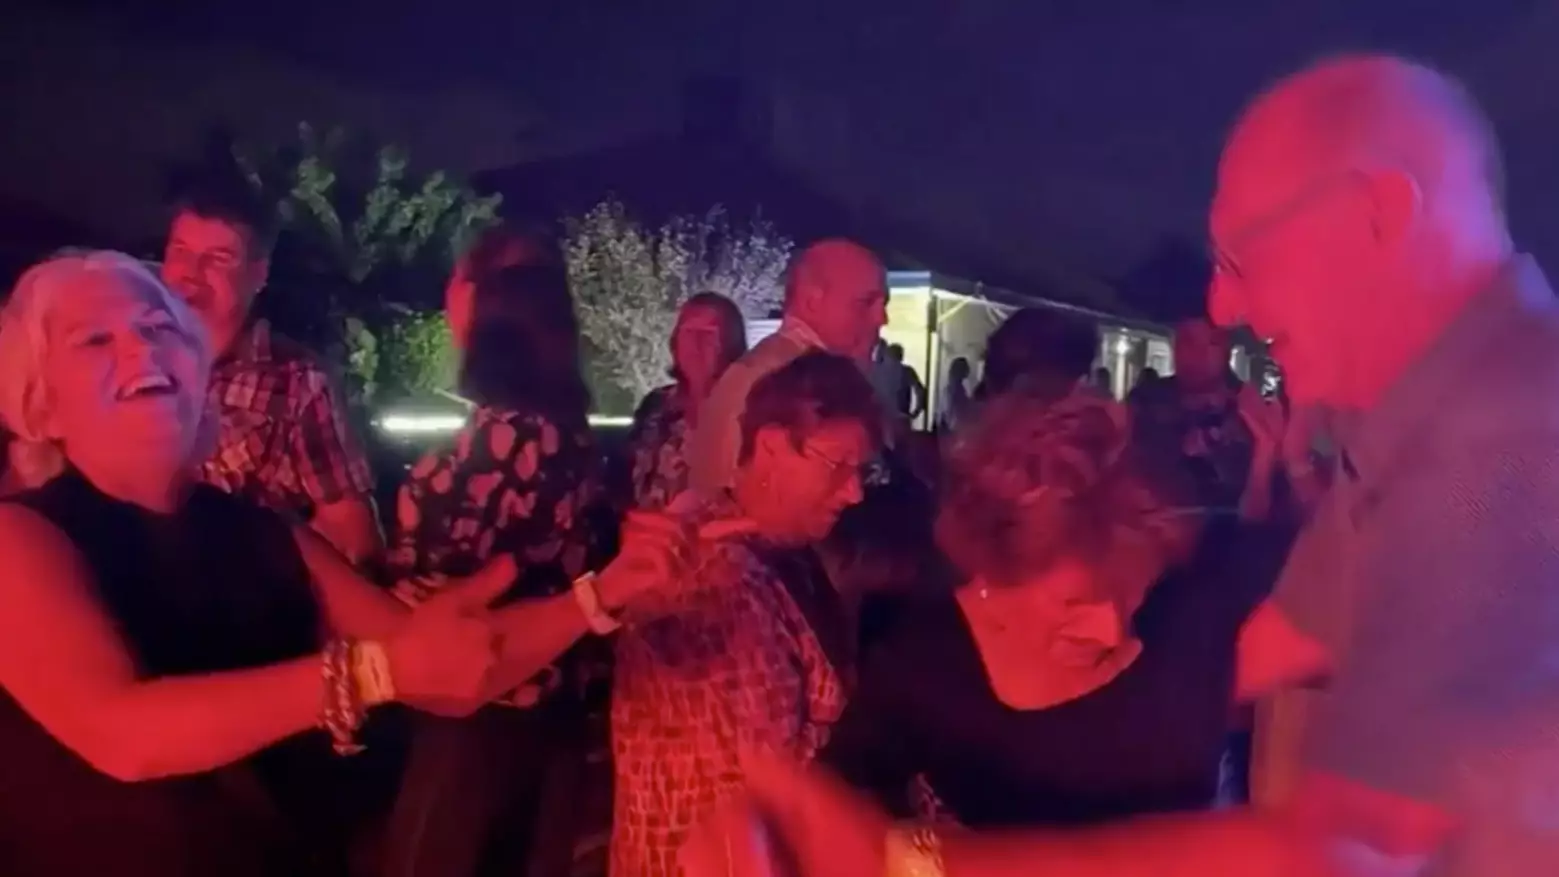 Perth Pensioners Have Party Shut Down After Noise Complaint From Neighbour